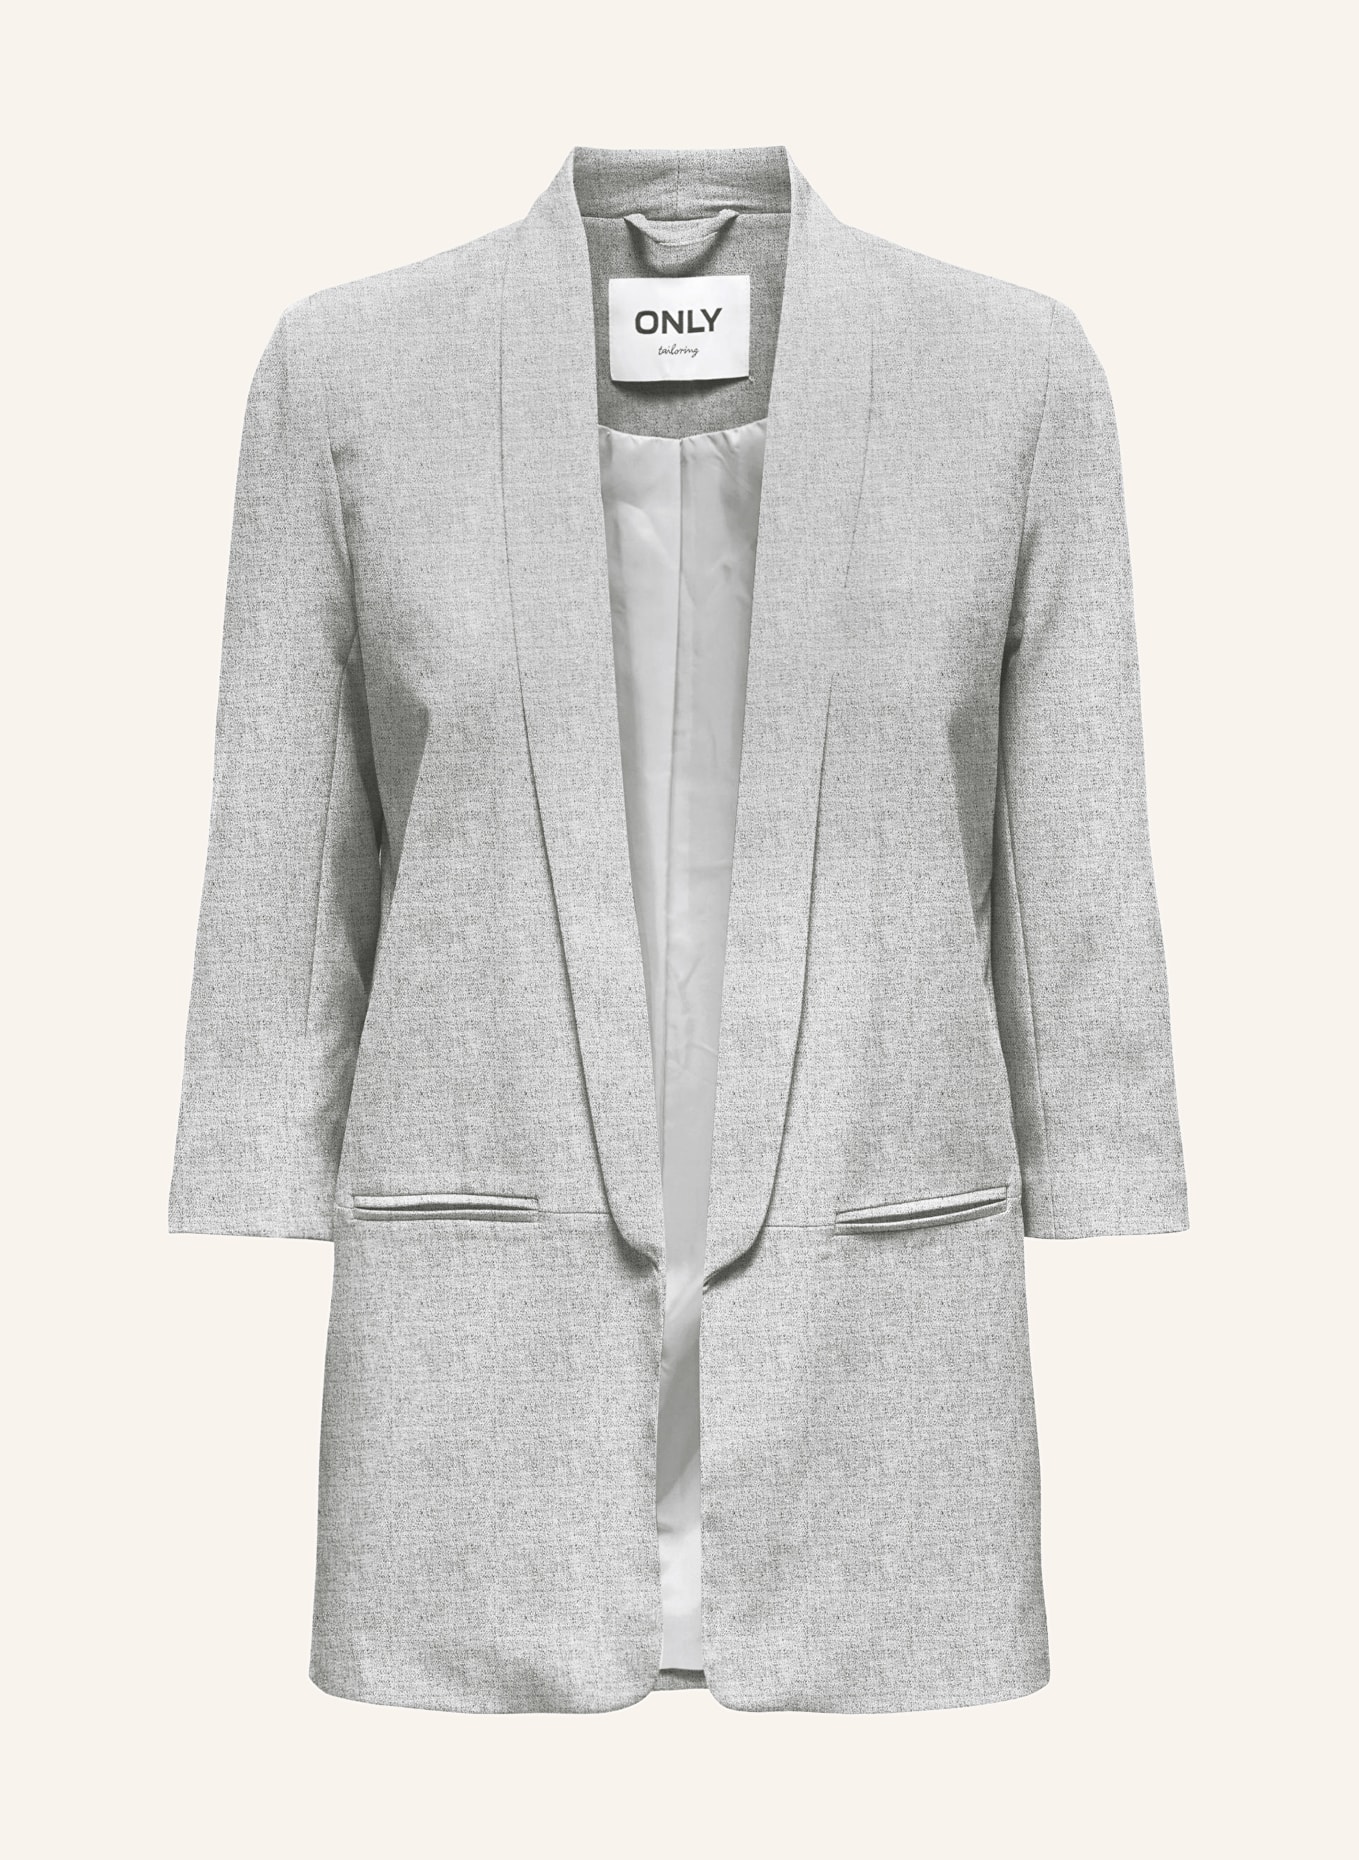 ONLY Blazer with 3/4 sleeve, Color: GRAY (Image 1)